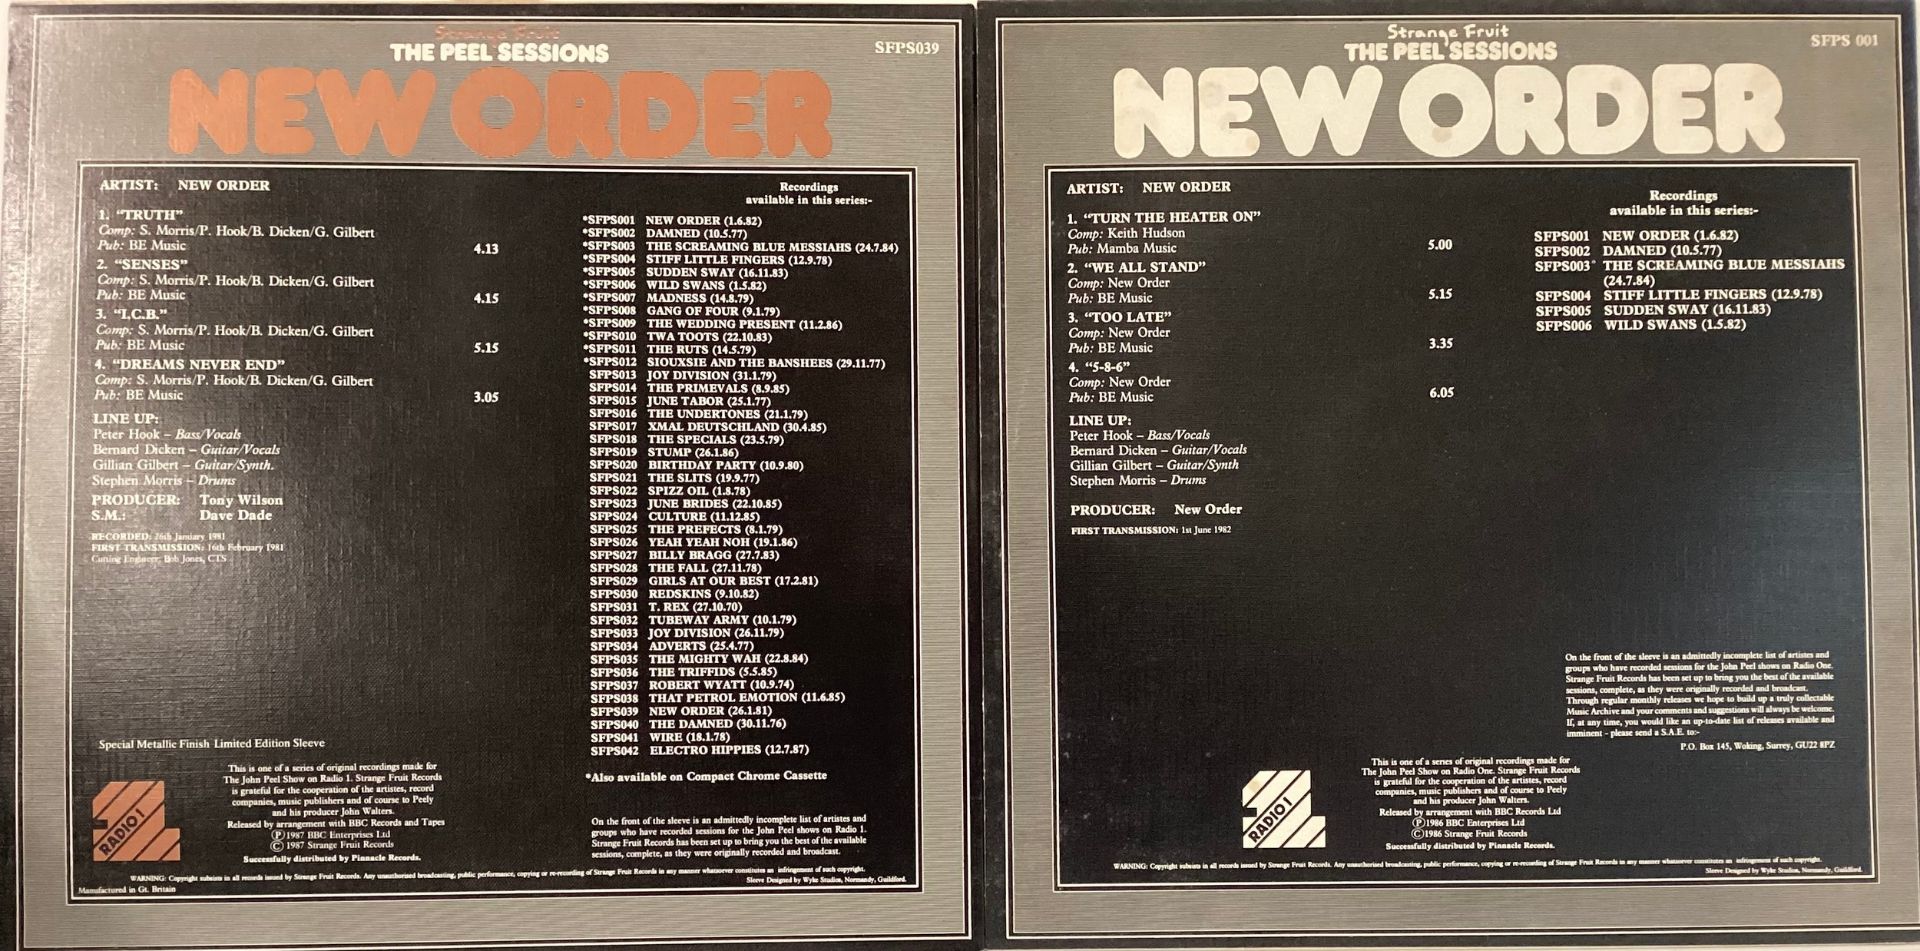 NEW ORDER PEEL SESSIONS X 2 VINYL RECORDS. Both found here on Strange Fruit Record labels SFPS 001 & - Image 2 of 2